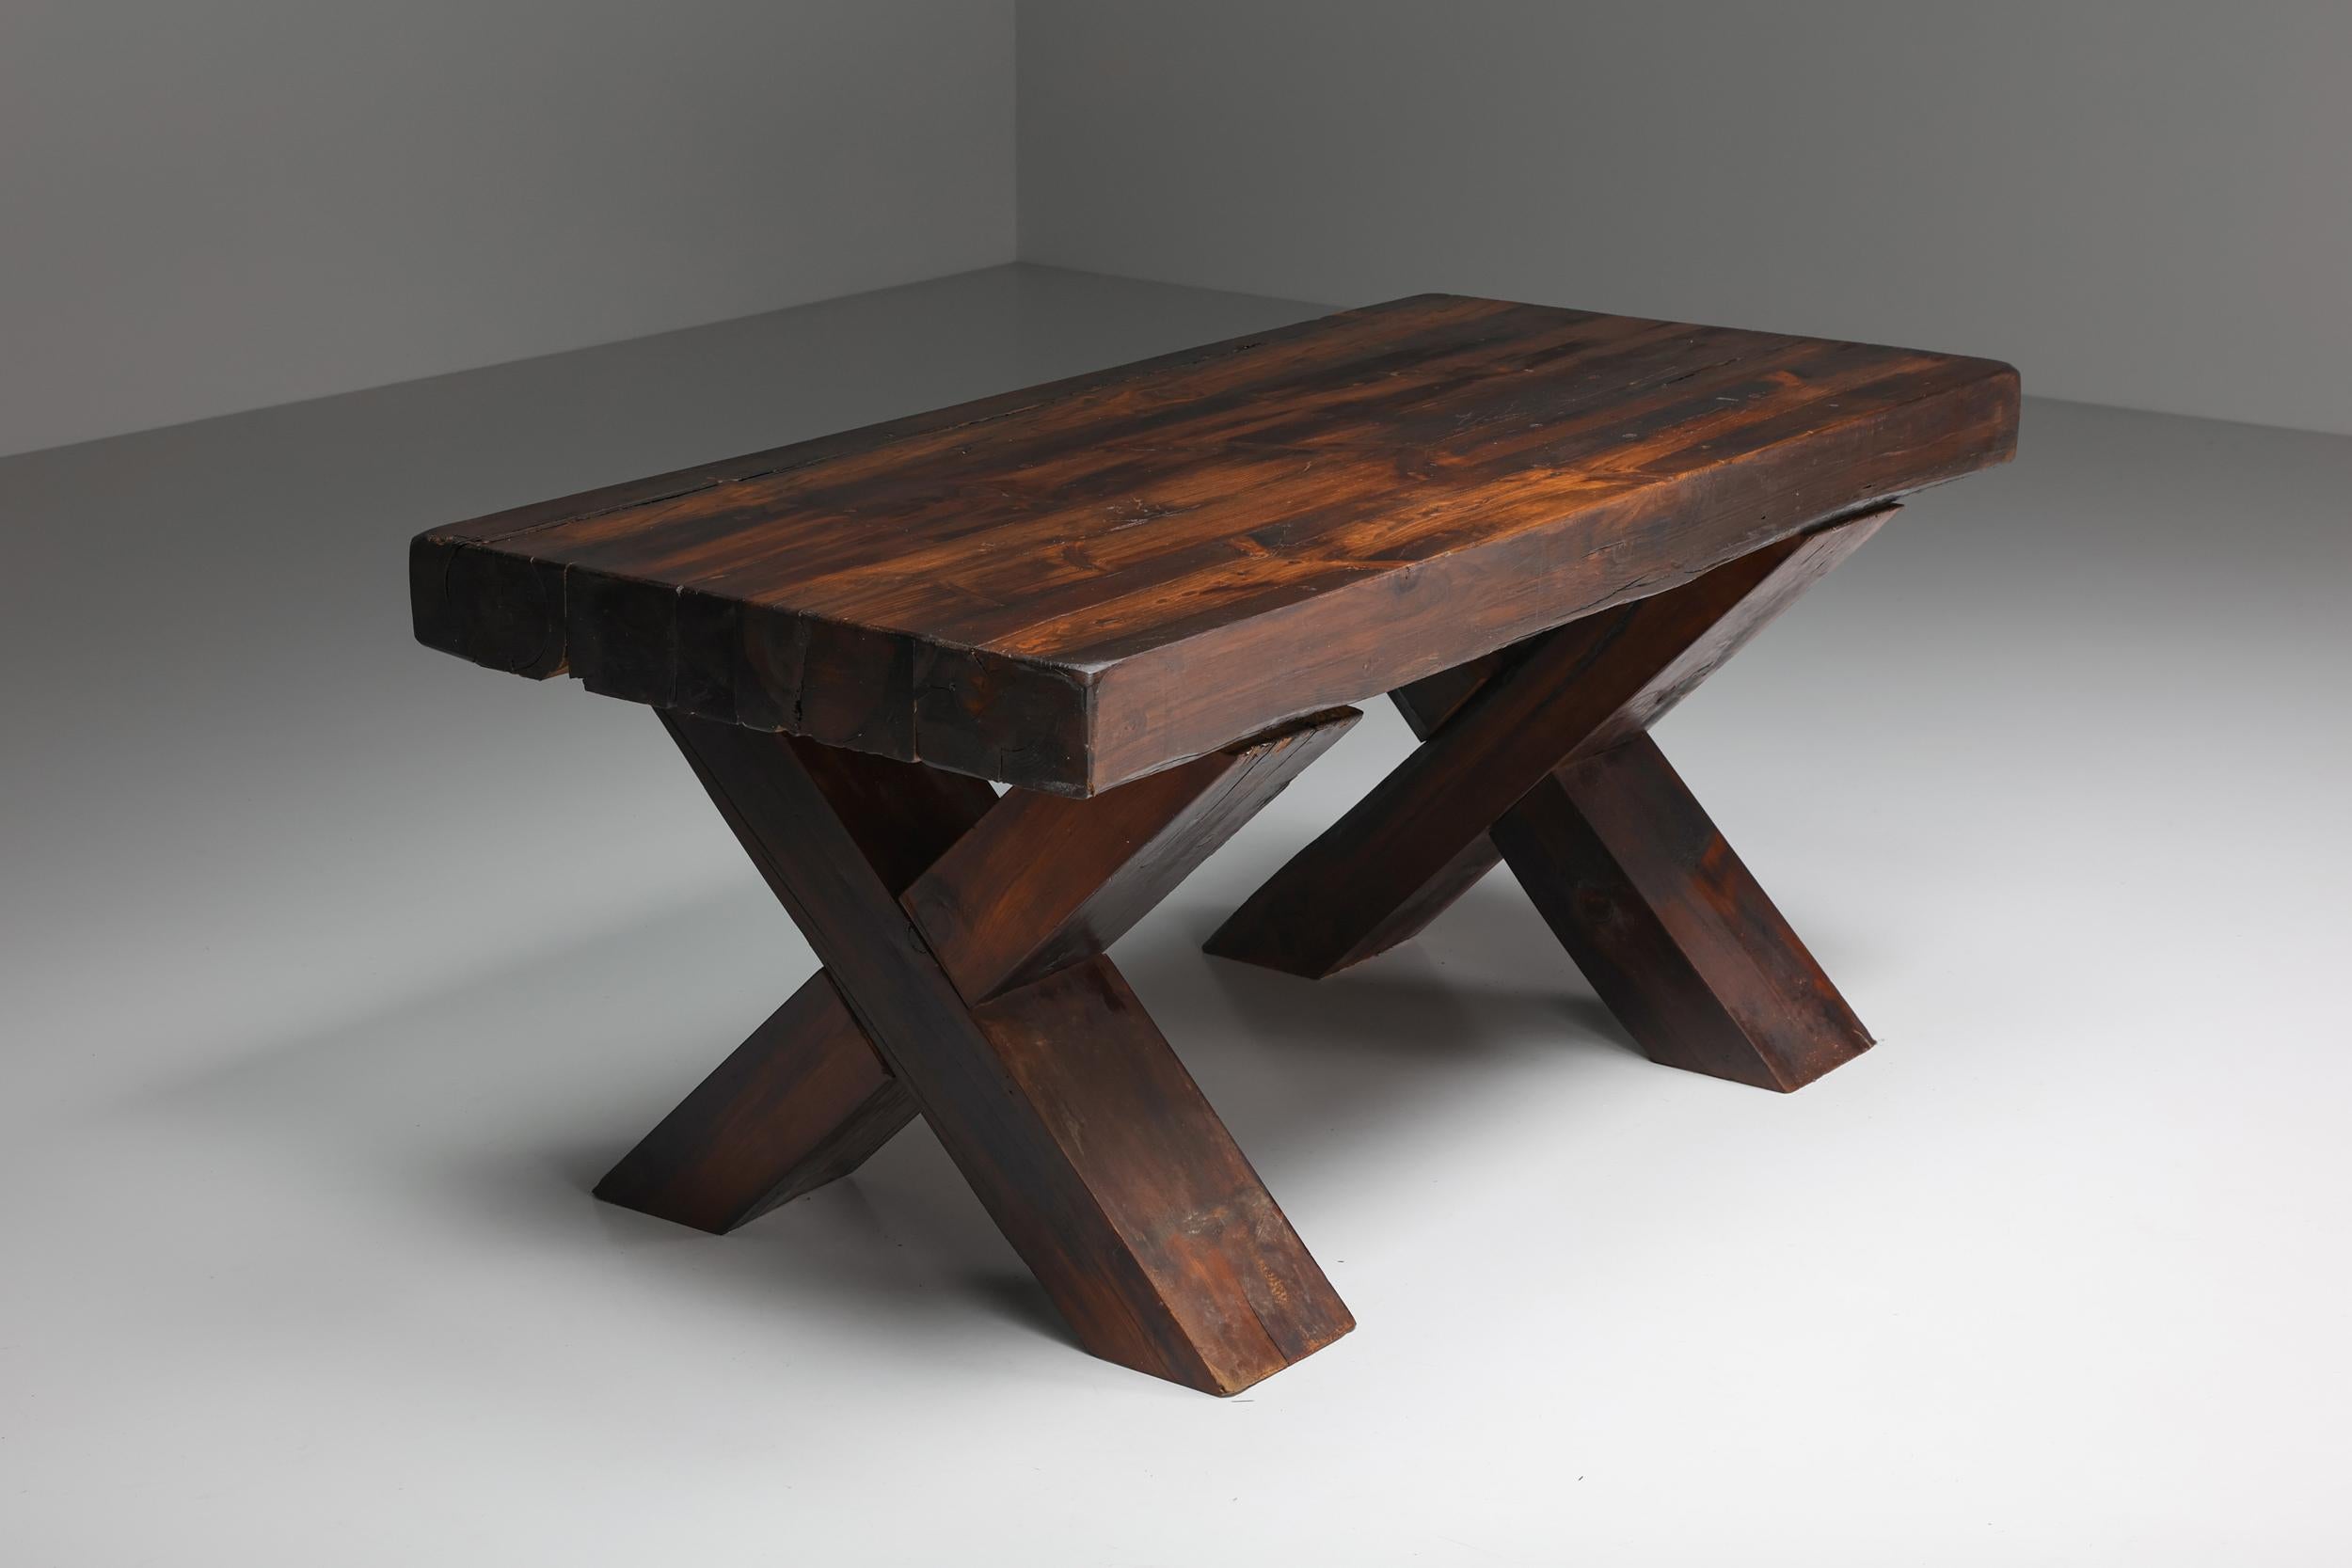 Mid-20th Century Rustic Brutalist Dark Wooden Dining Table with X-Legs, Italy, 1940's For Sale